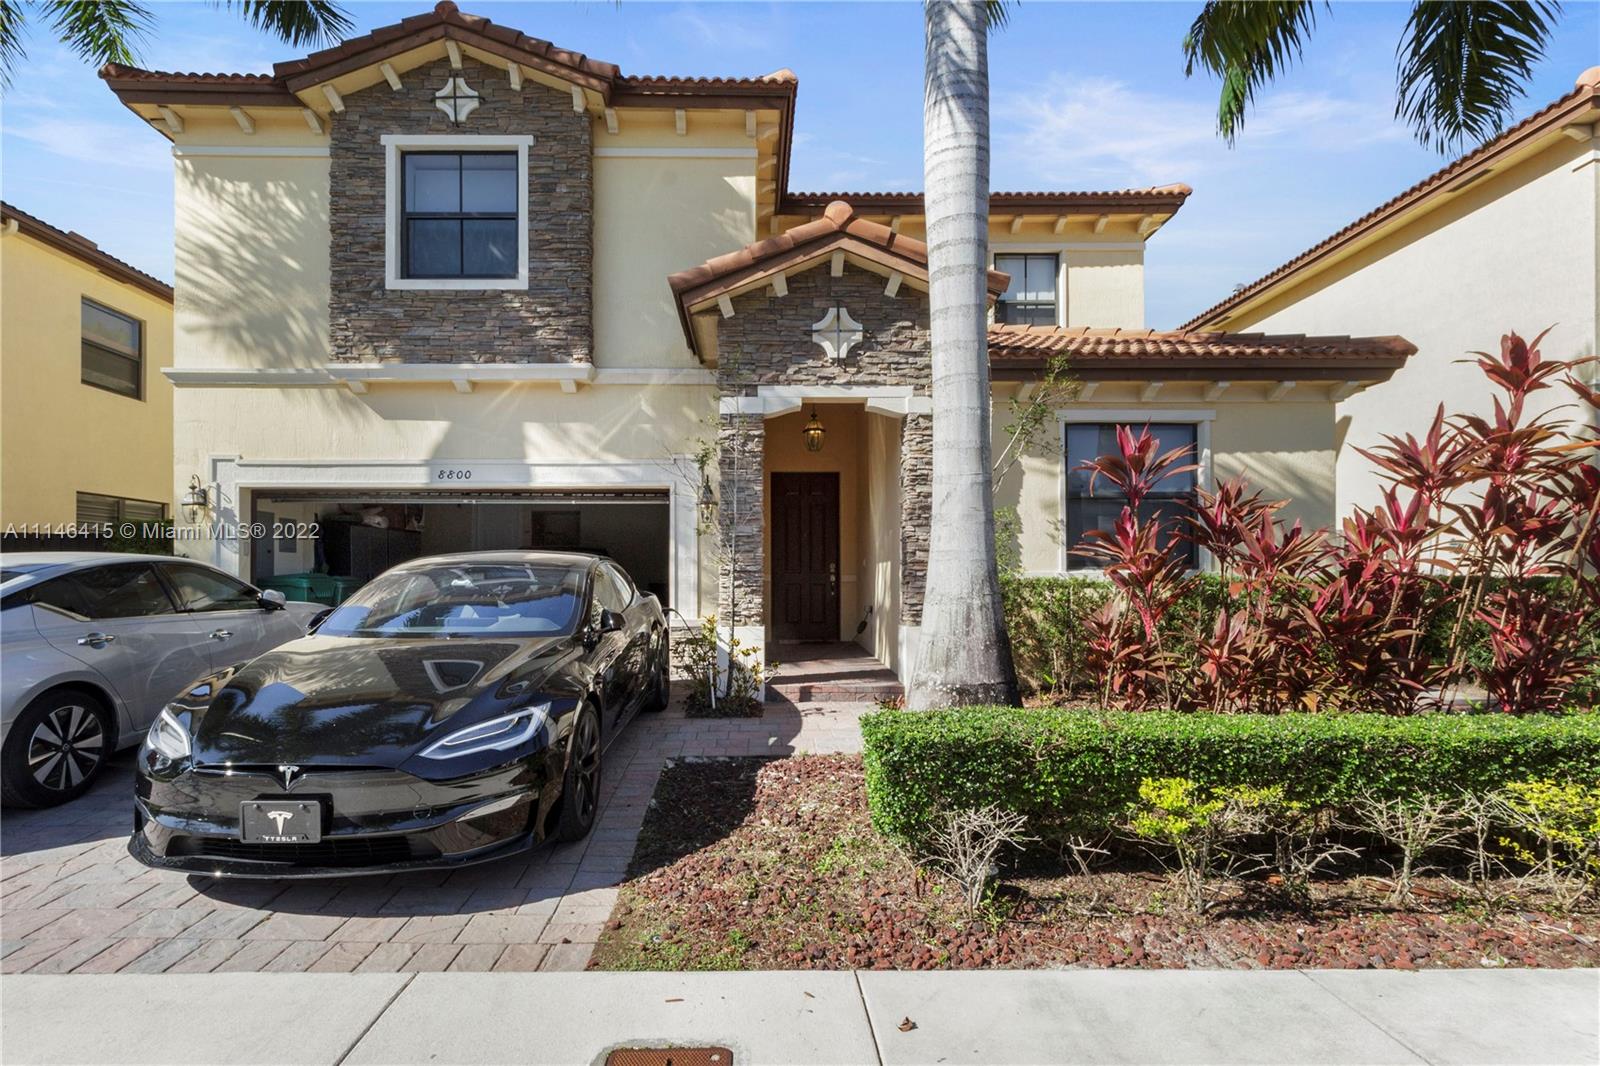 The Isles at Grand Bay / Doral / 5 Beds / 4.5 Baths / 3,820 sq. ft. of living area / Beautiful lakefront single-family house with pool / Open kitchen with granite countertops, breakfast area, and stainless steel appliances / Guest House (In-Law Suite) with 1 bed, 1 bath, and a mini kitchen. It is an ideal home for an extended family! / 2 cars covered parking garage + 2 driveway parking spaces / Enjoy the impressive and convenient amenities of Doral Breeze community including a clubhouse, water park, tennis court, pools, gym, basketball court, and more much more!